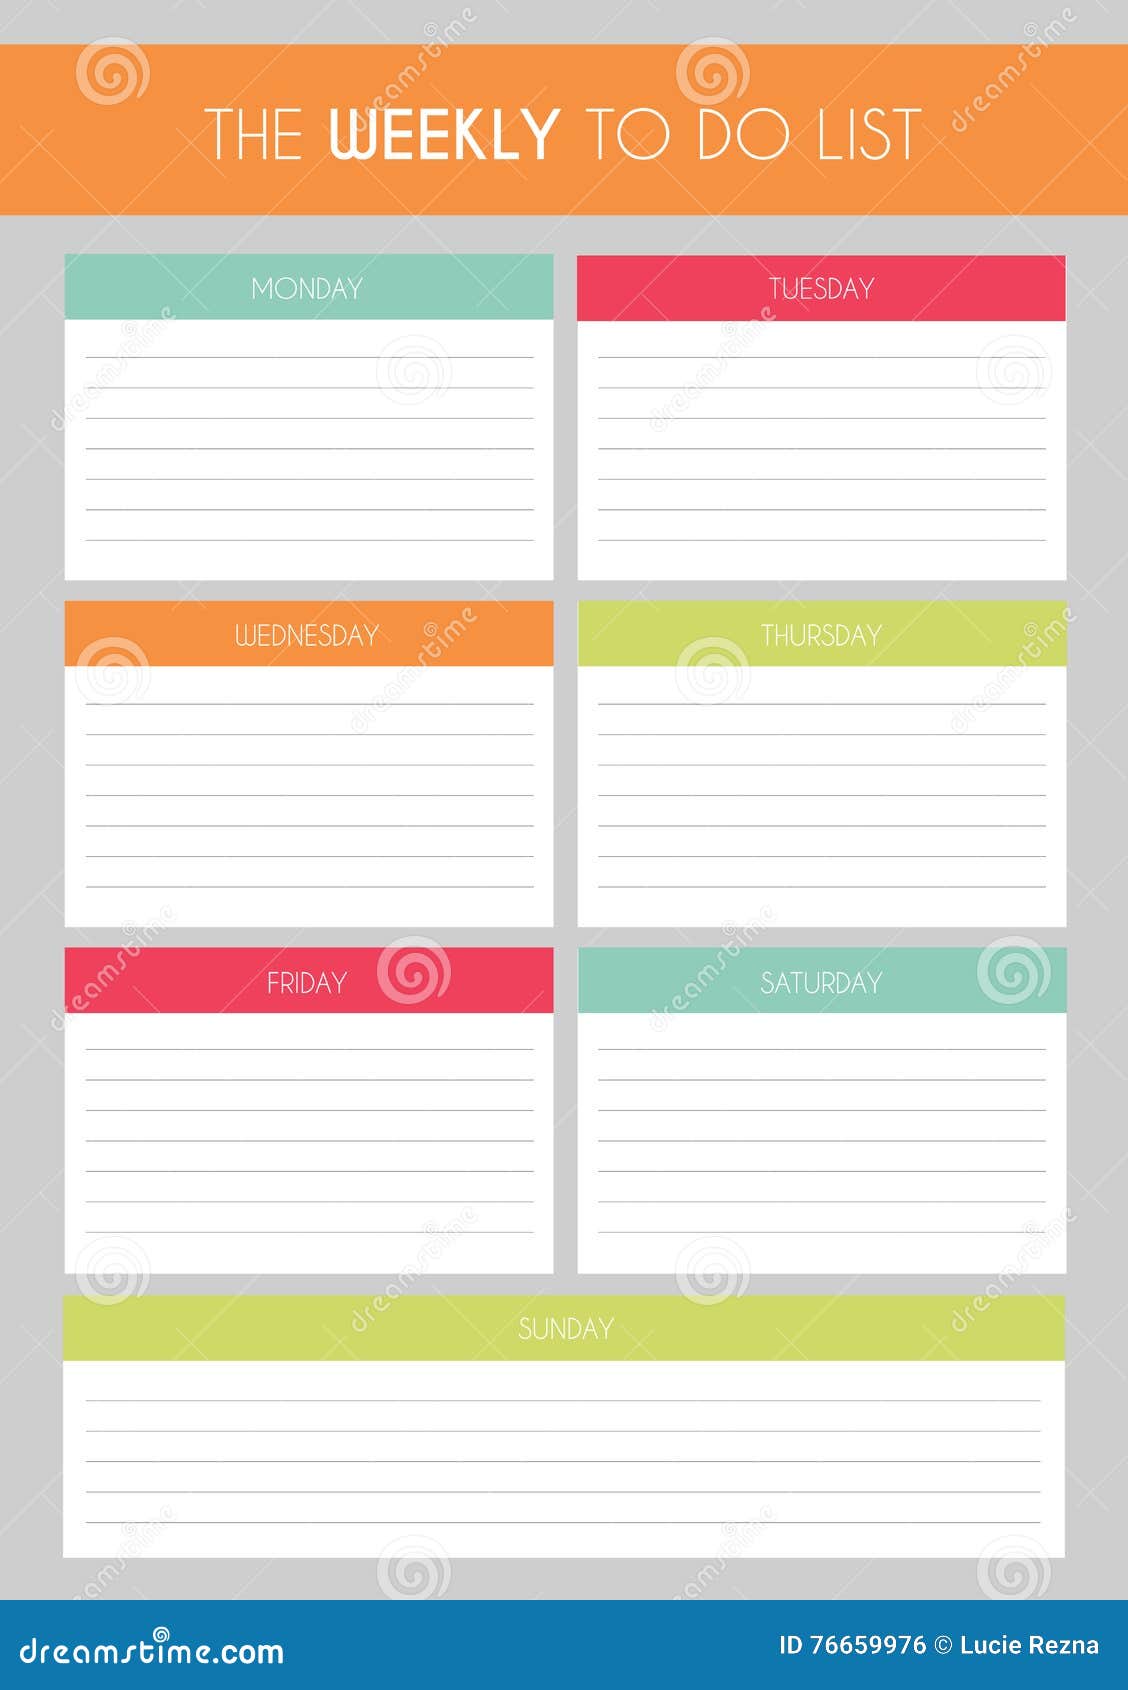 Simple To Do List Template from thumbs.dreamstime.com